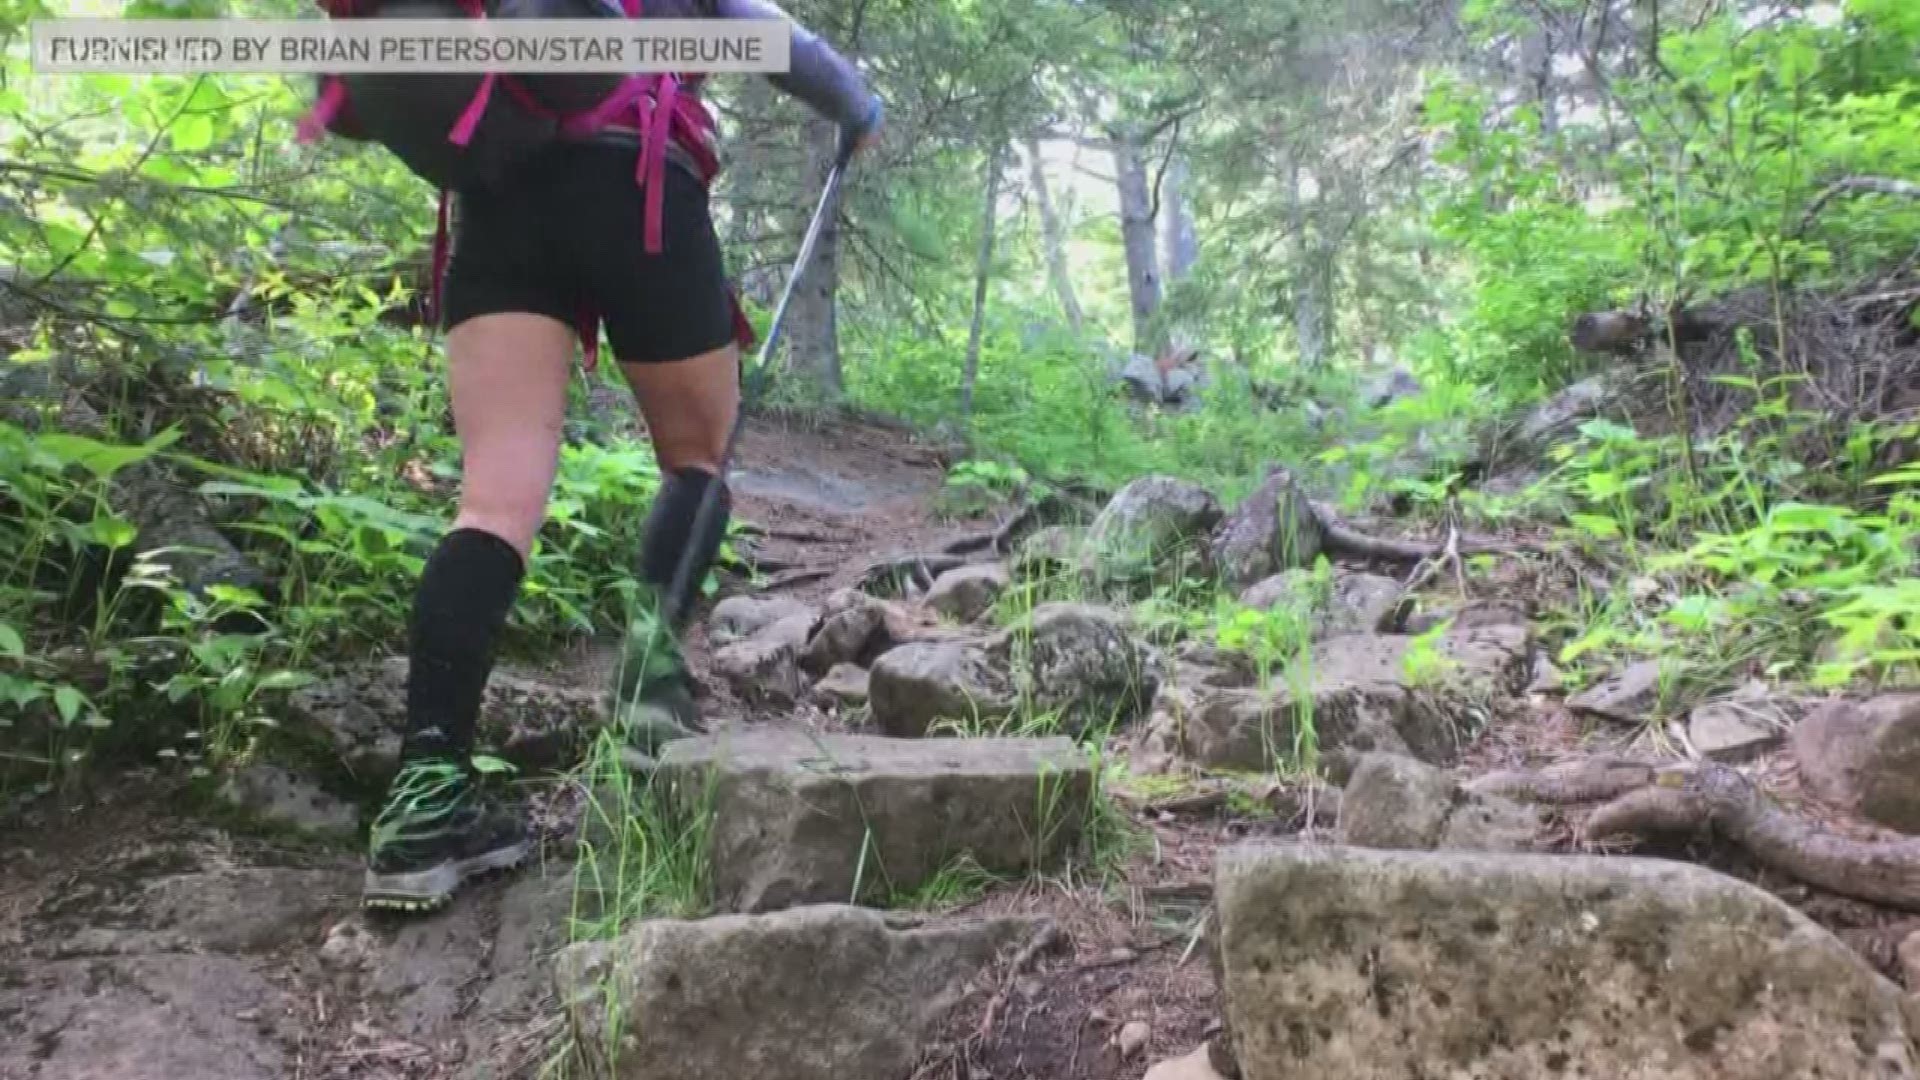 Many Minnesotans have spent time on portions of the Superior Hiking Trail, but a team from the Star Tribune recently navigated all 310 miles of it.